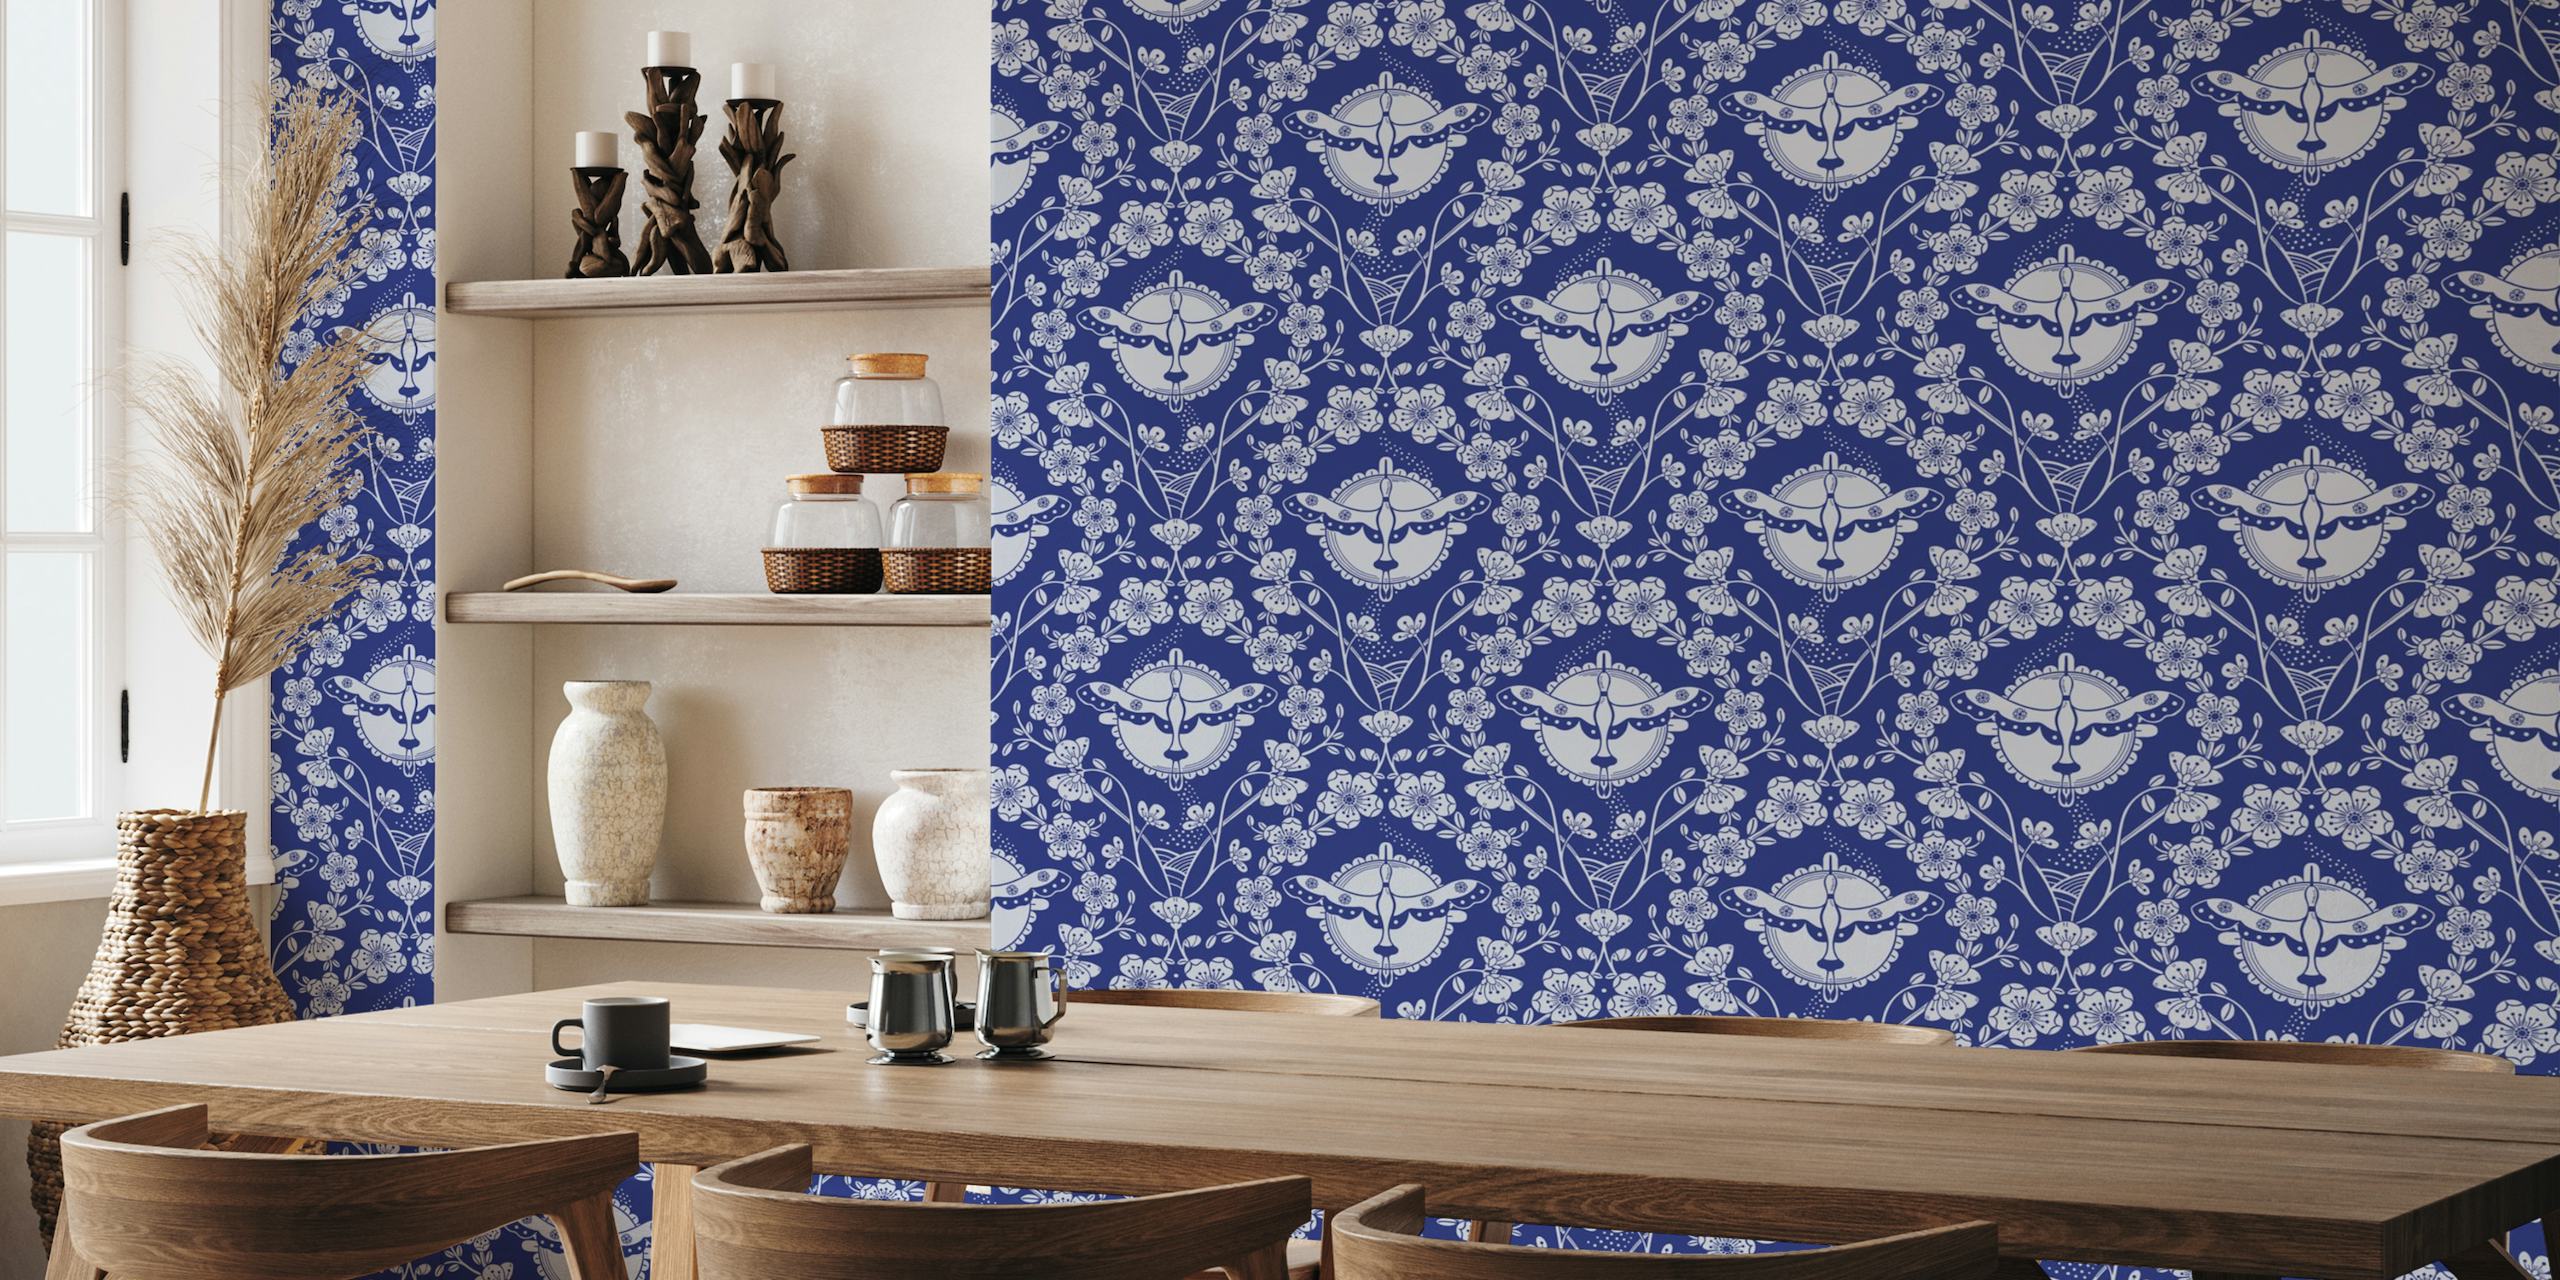 Navy blue wall mural depicting storks and floral patterns in a symmetrical design